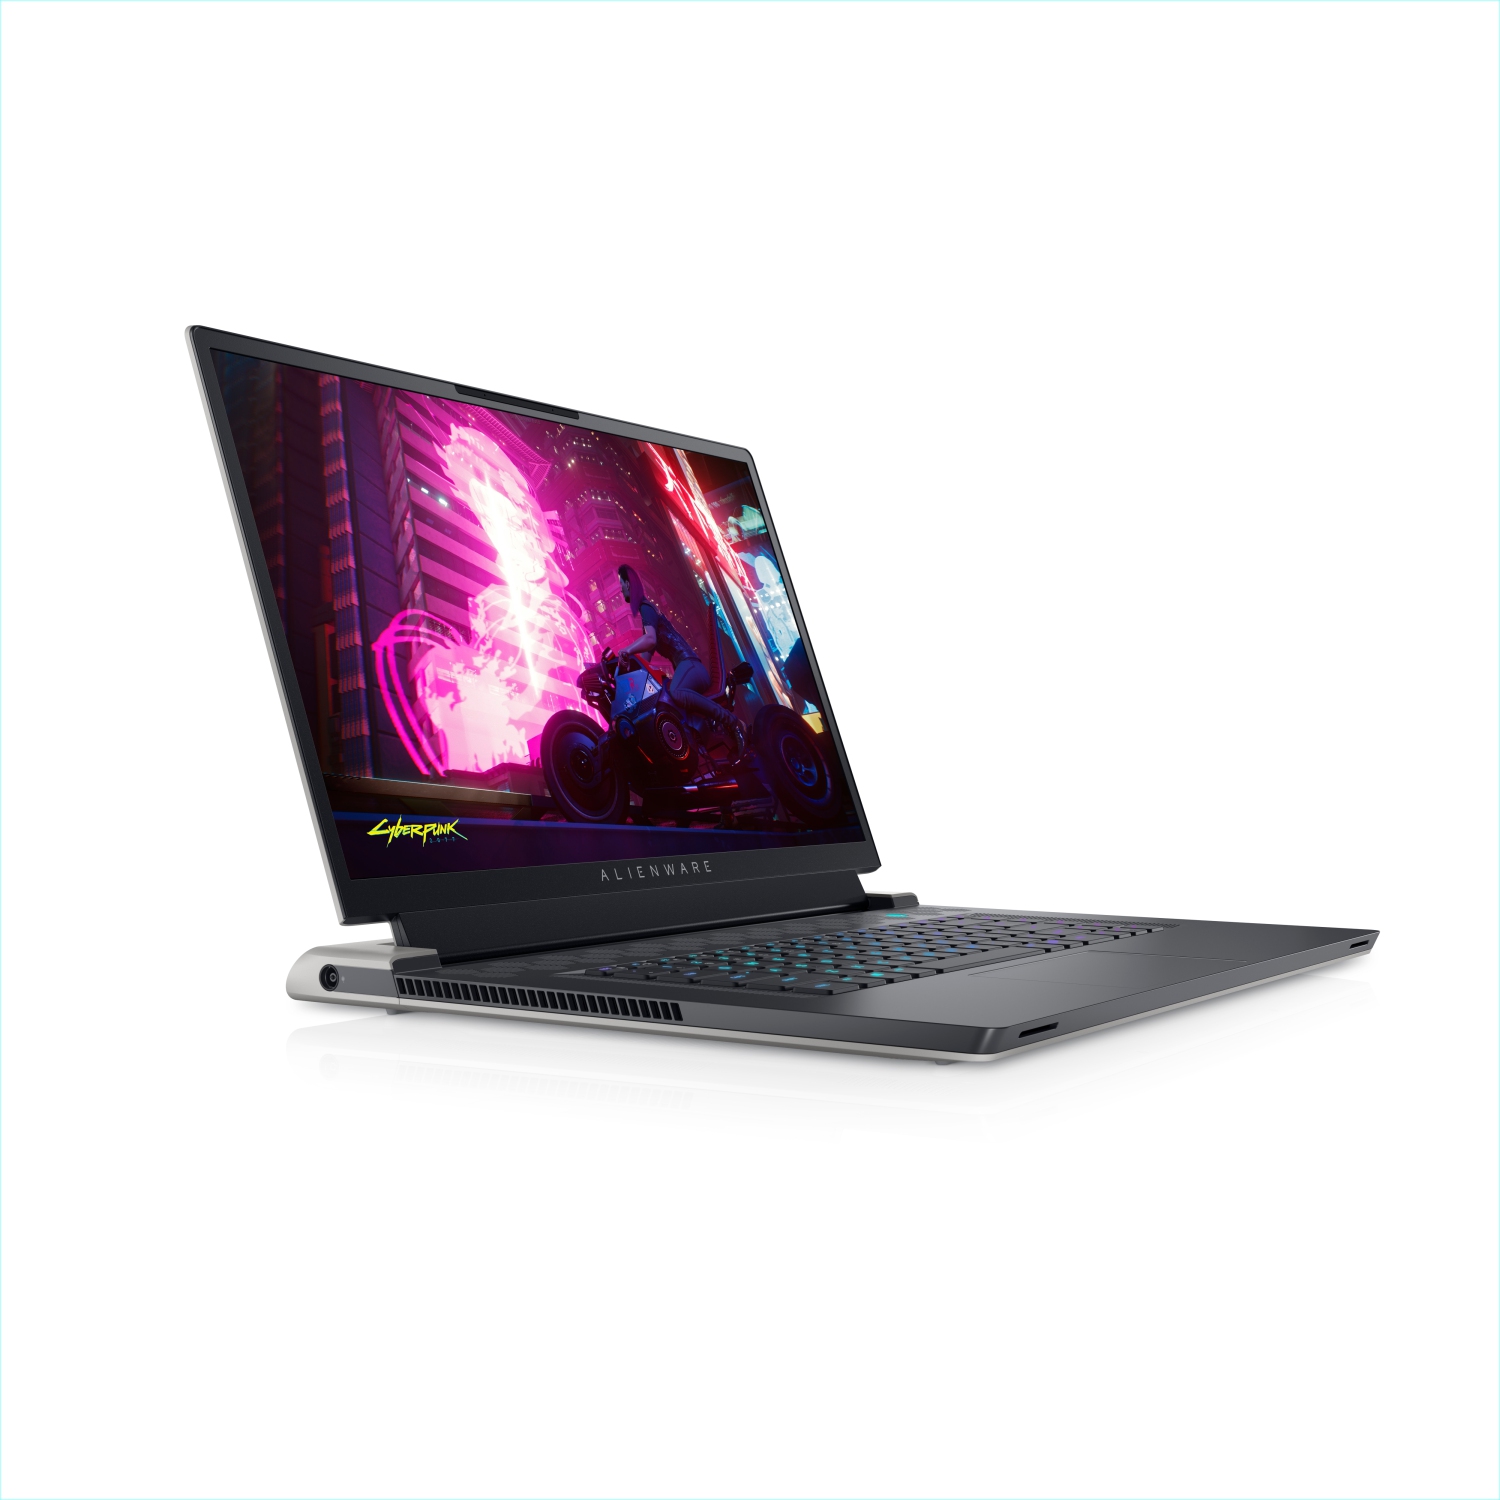 Refurbished (Excellent) - Dell Alienware X17 R1 Gaming Laptop (2021), 17.3" FHD, Core i9, 1TB SSD, 32GB RAM, RTX 3080, 8 Cores @ 5 GHz, 11th Gen CPU Certified Refurbished